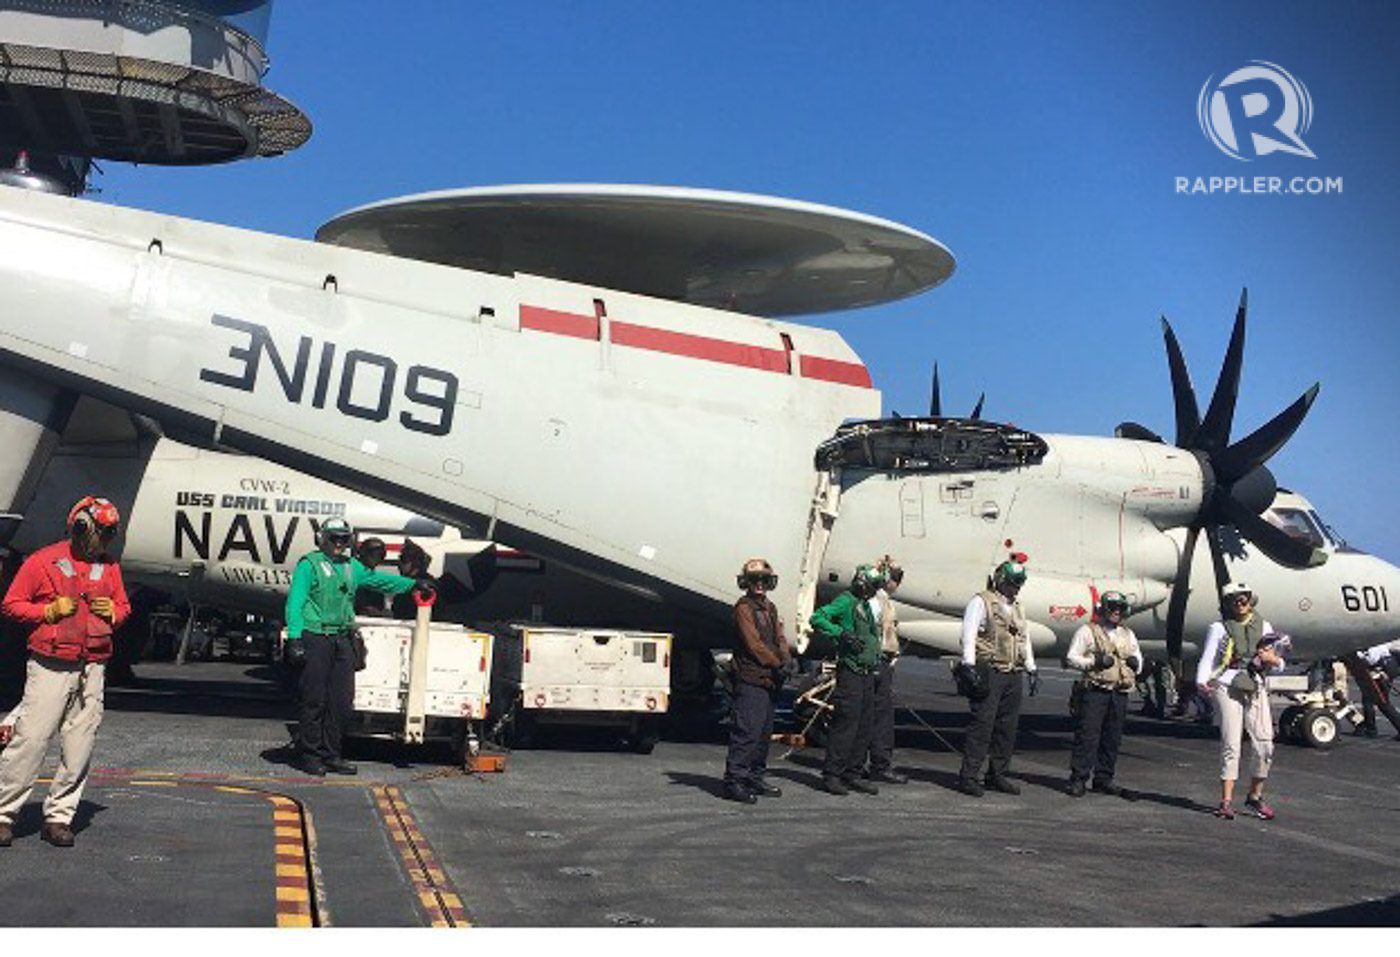 SAVING SPACE. An E-2C Hawkeye with folded wings to save space on the flight deck. Photo by Camille Elemia/Rappler  